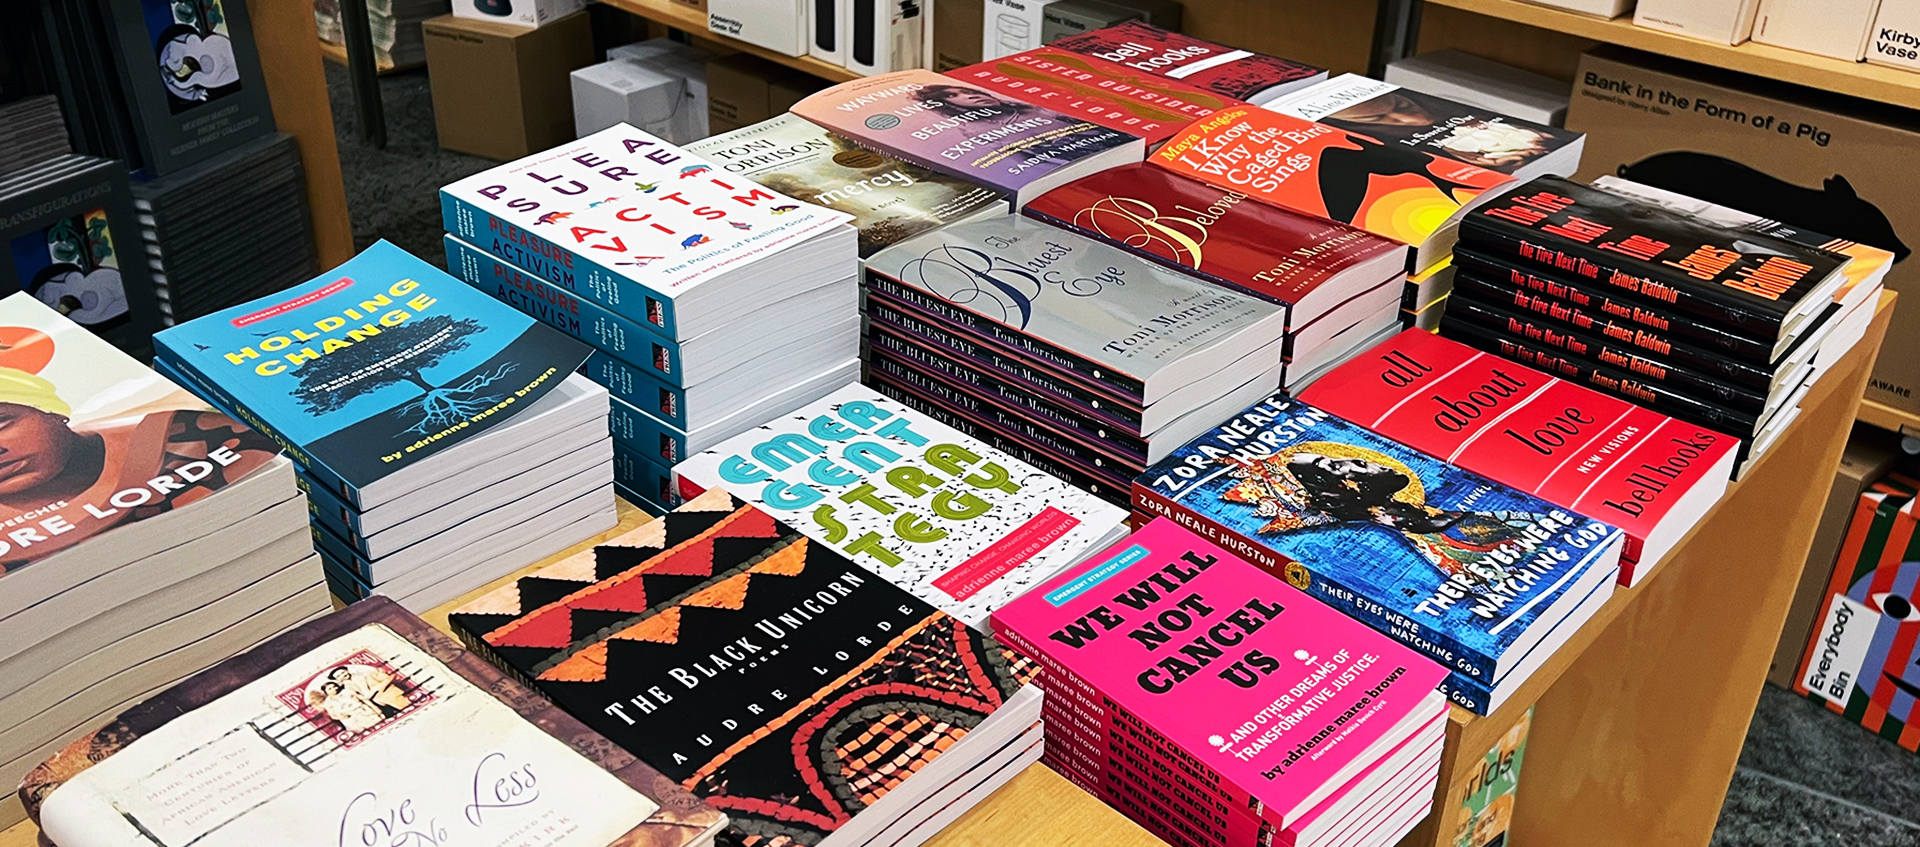 Photo of books on display in the Wexner Center Store that are included in curator jaamil olawale kosoko’s Syllabus for Black Love Library.